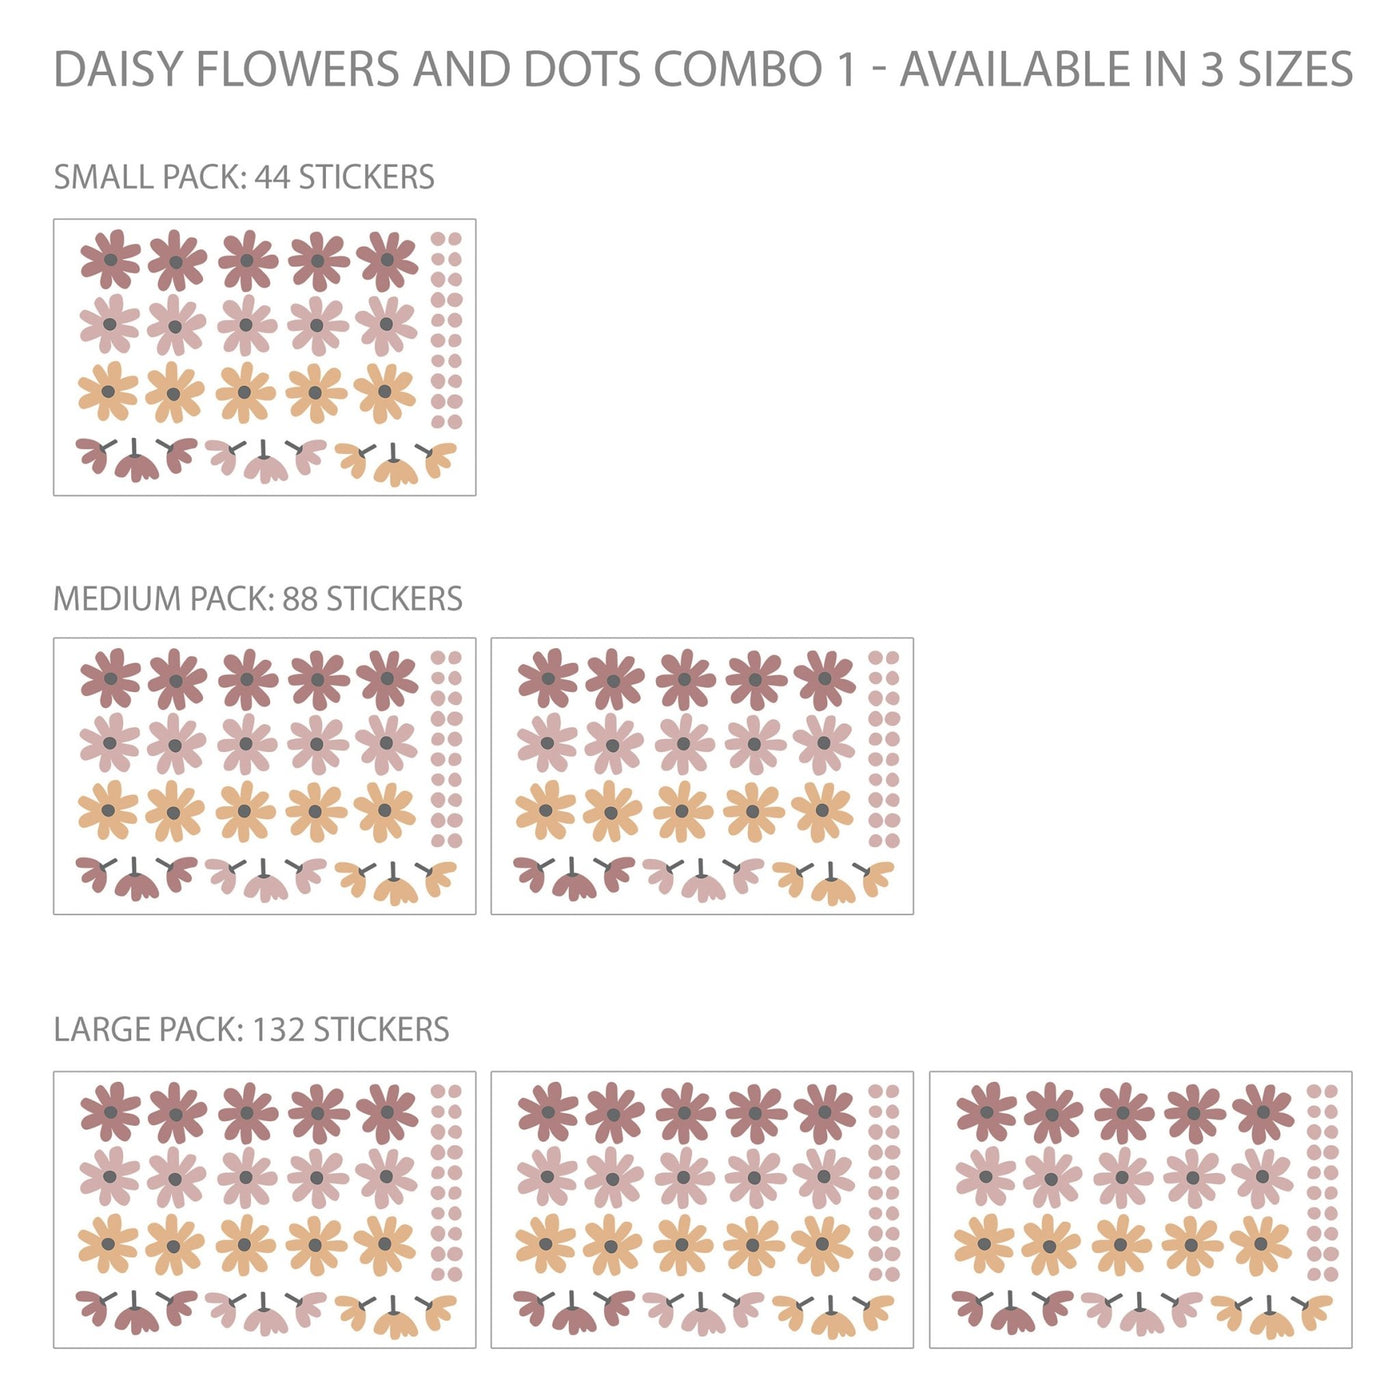 Daisy Flowers and Polka Dot Wall Stickers Colour Combo 1 - Jack Harry and Ollie